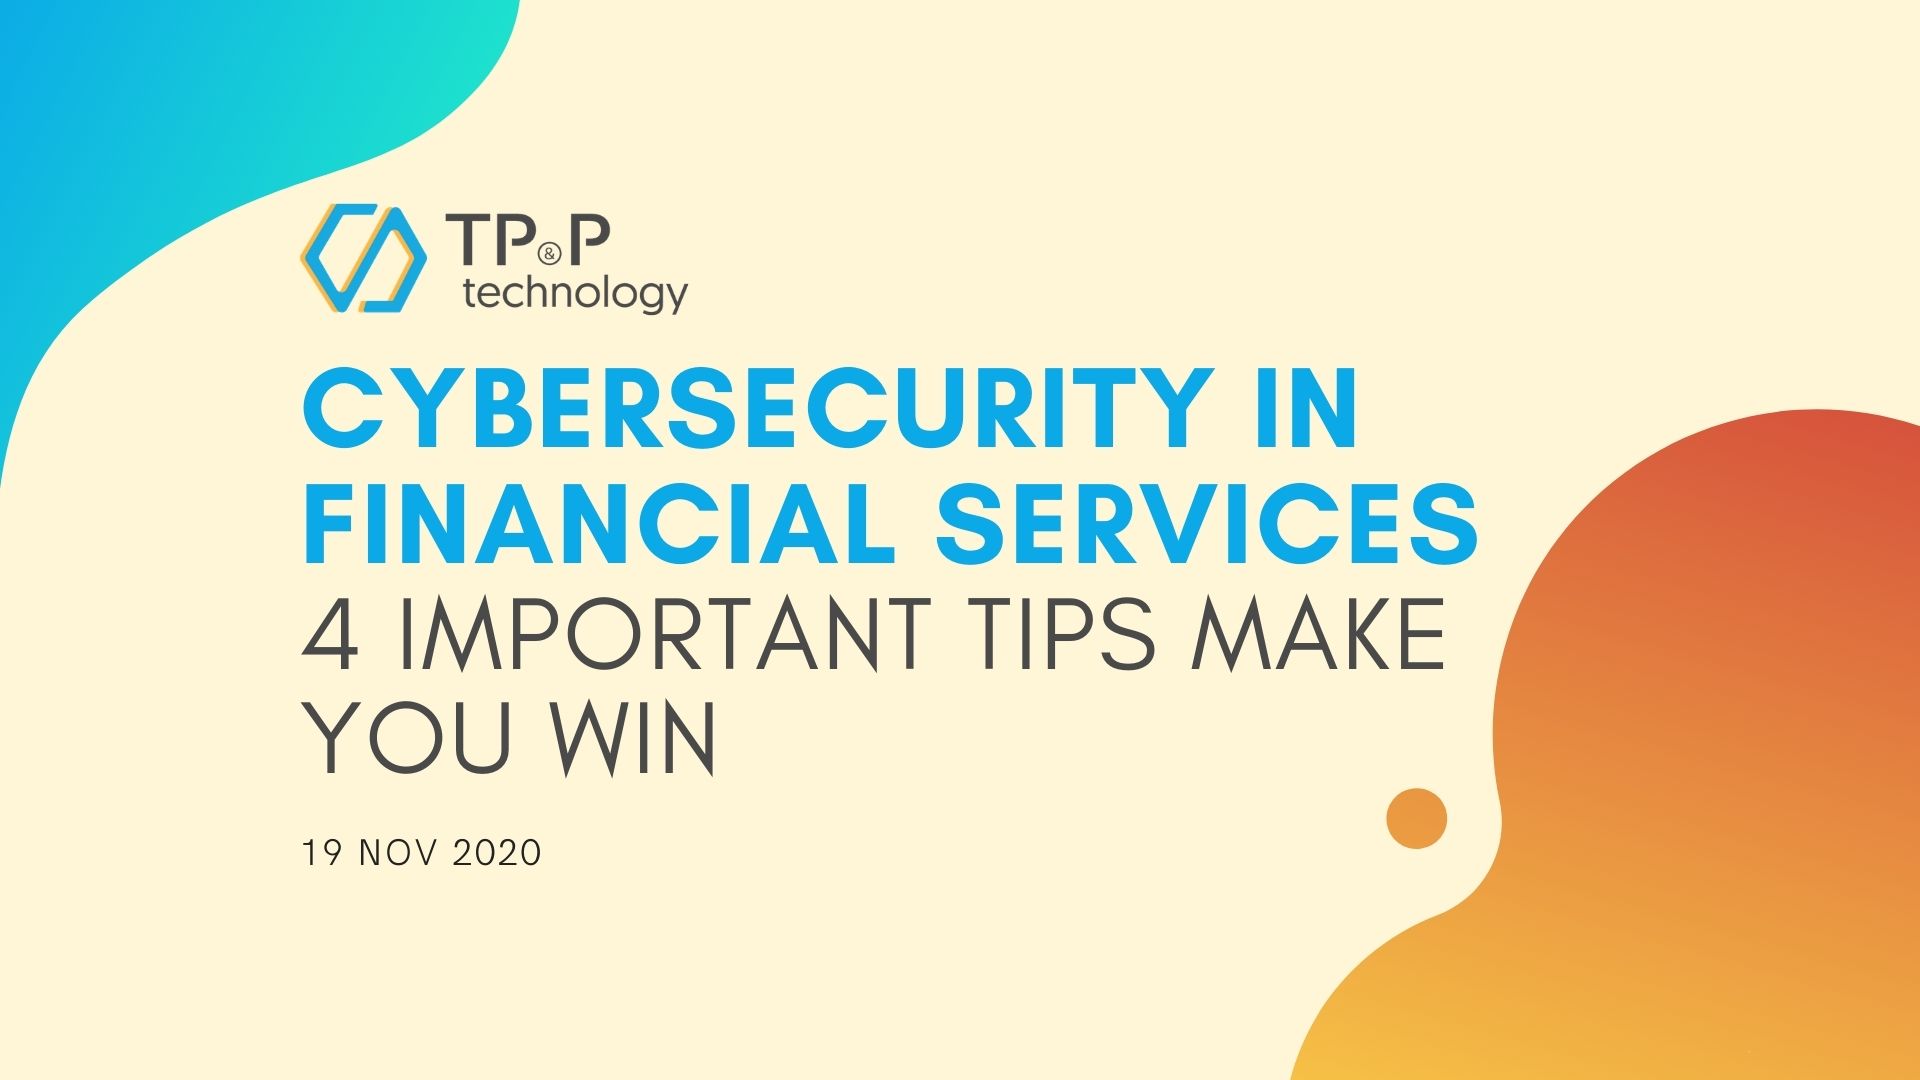 Cybersecurity In Financial Services: 4 Important Tips Make You Win